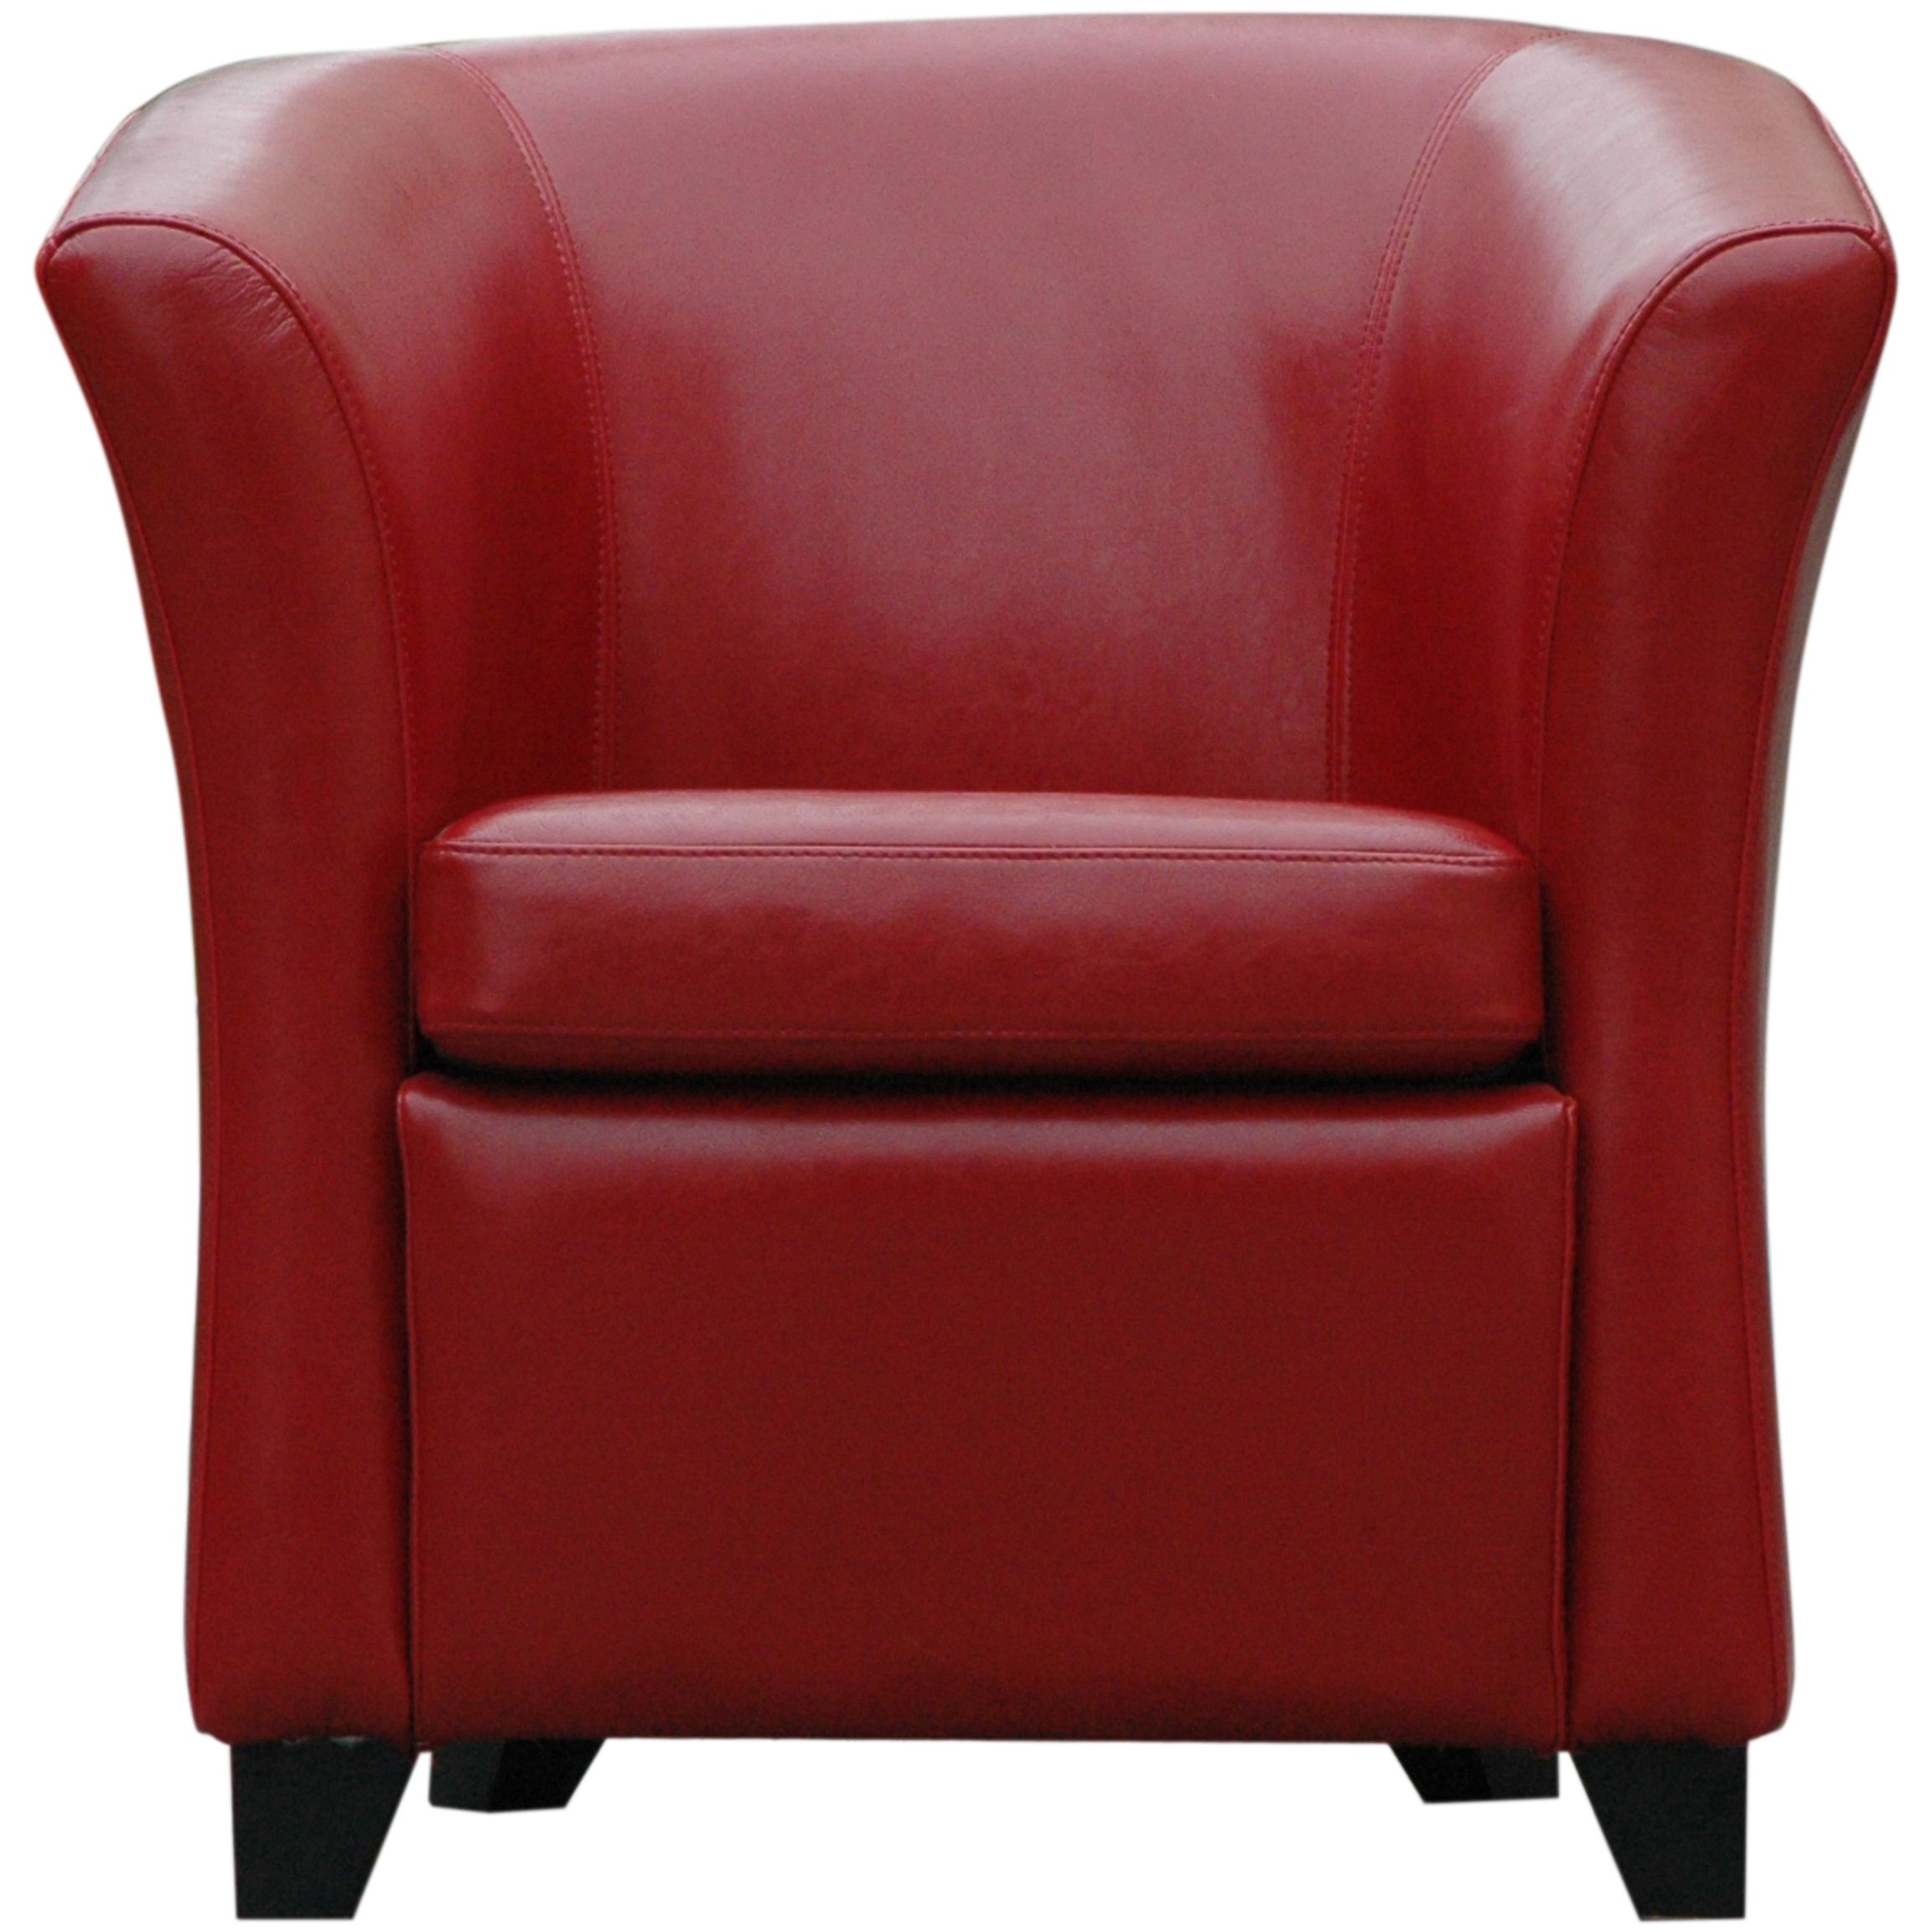 John Lewis Romeo Leather Club Chair, Red